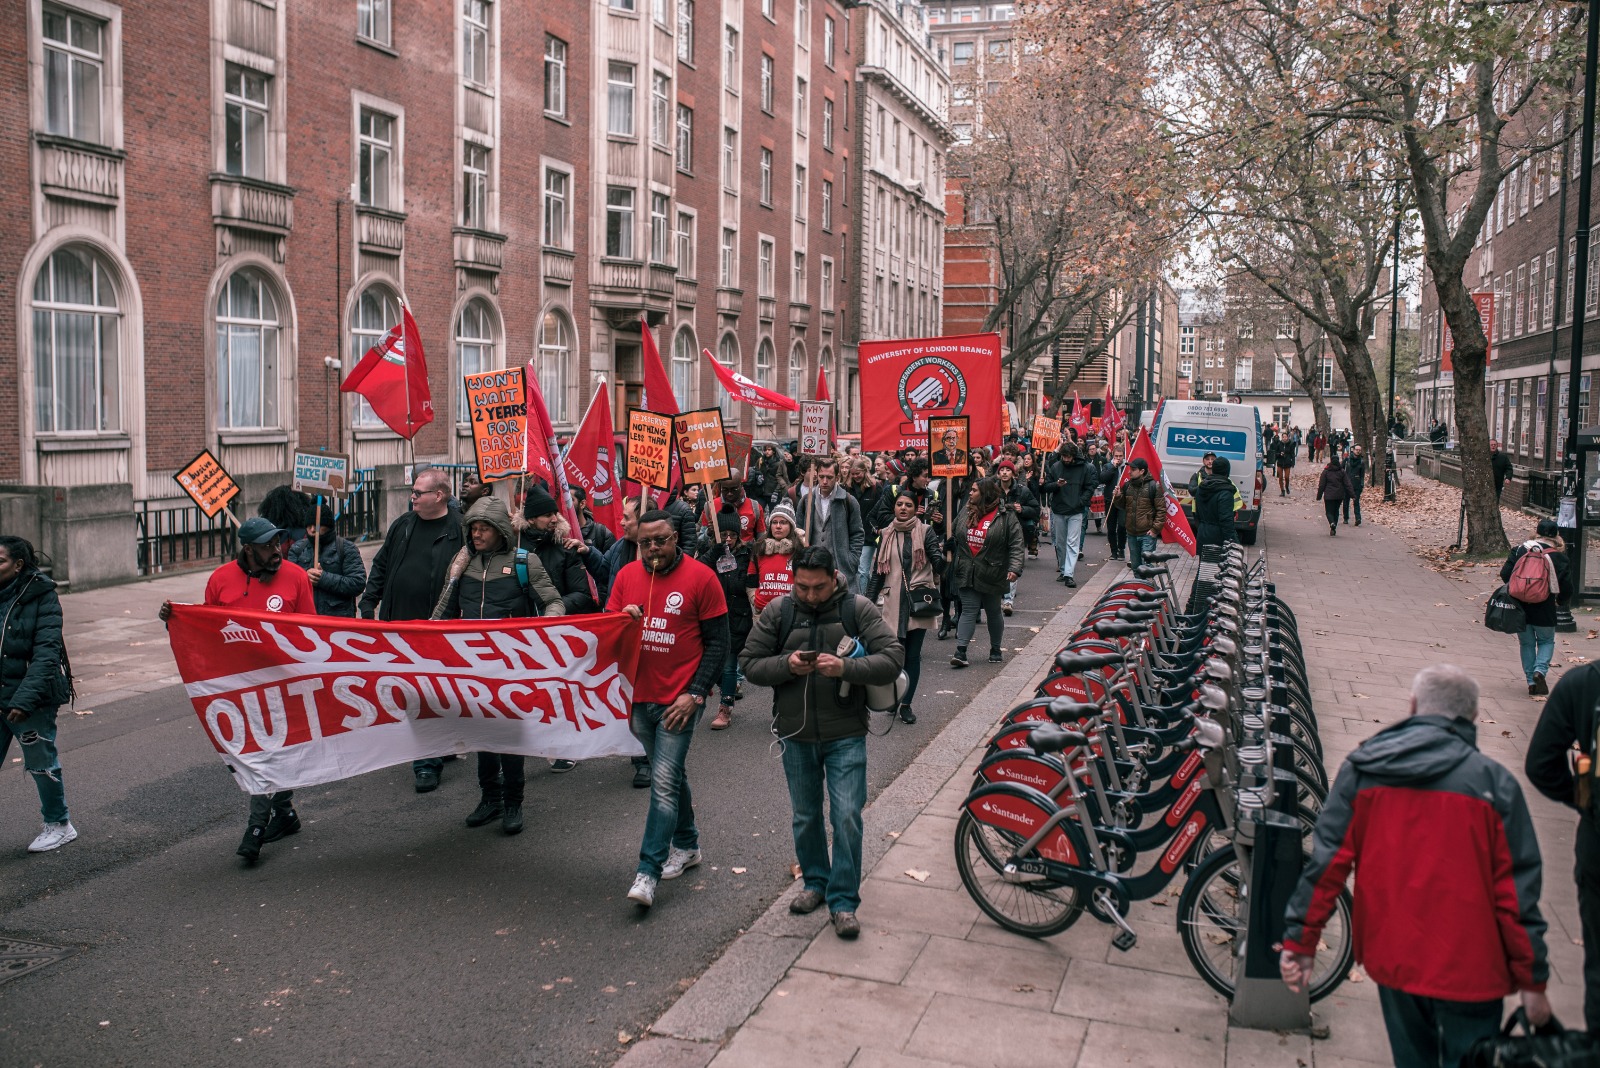 IWGB strikers march on UCL gounds